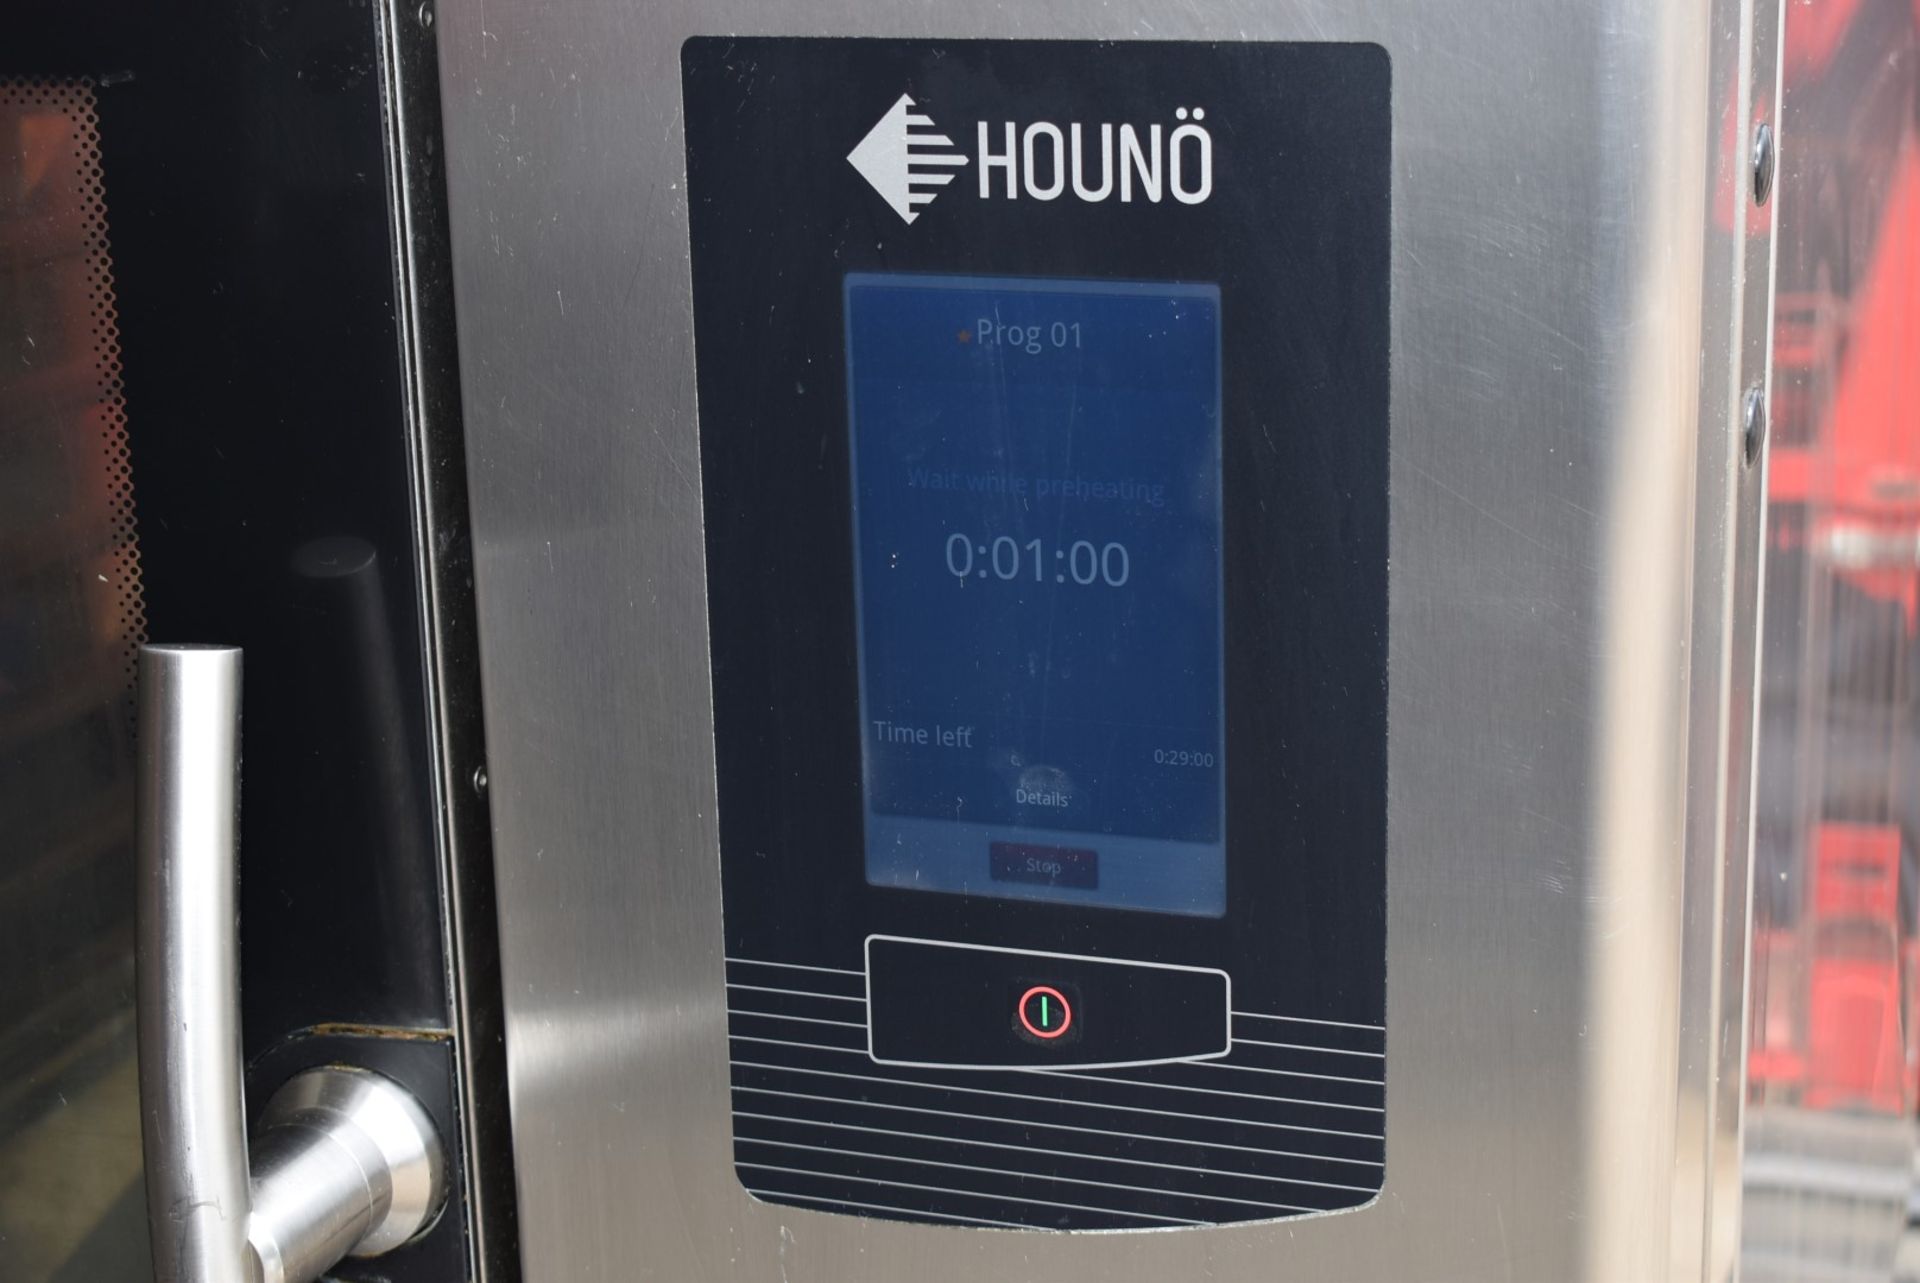 1 x Houno 6 Grid Electric Passthrough Door Combi Oven - 3 Phase With Pre-Set Cooking Options - Image 12 of 17